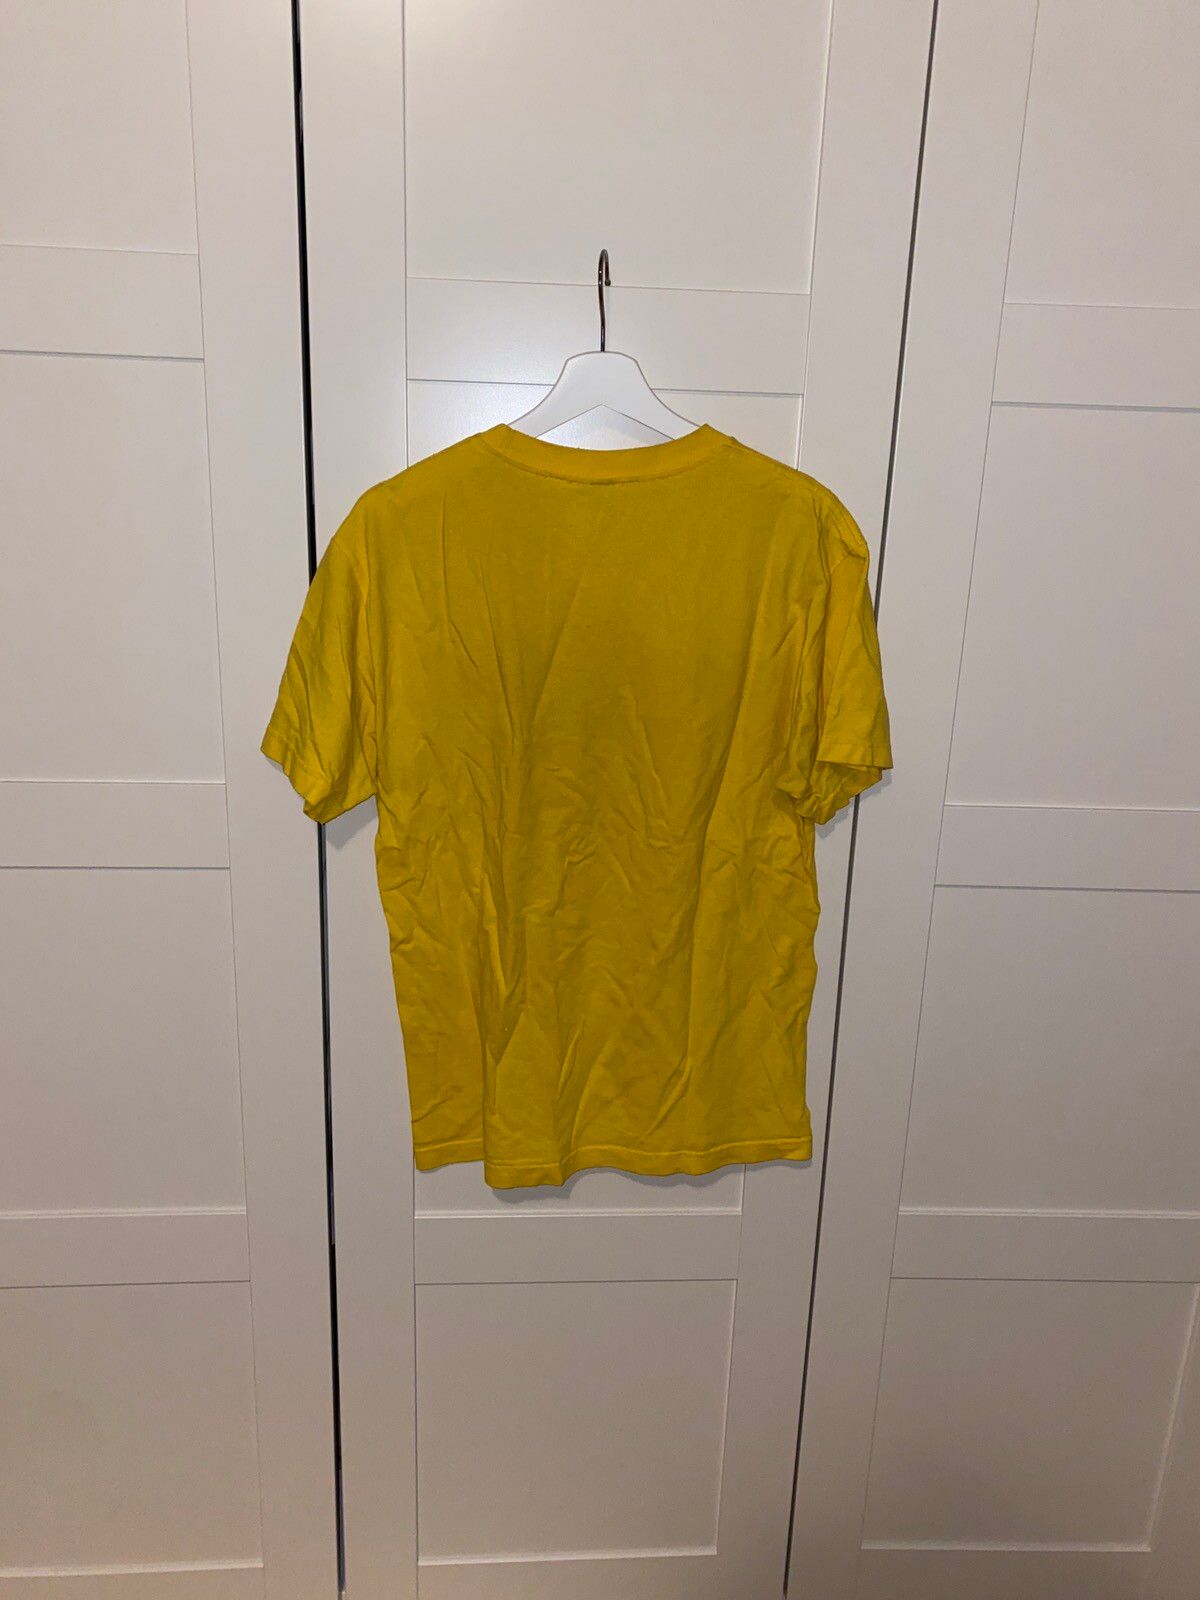 Know Wave Know Wave Knowledge Wave T-Shirt Yellow Size US M / EU 48-50 / 2 - 2 Preview